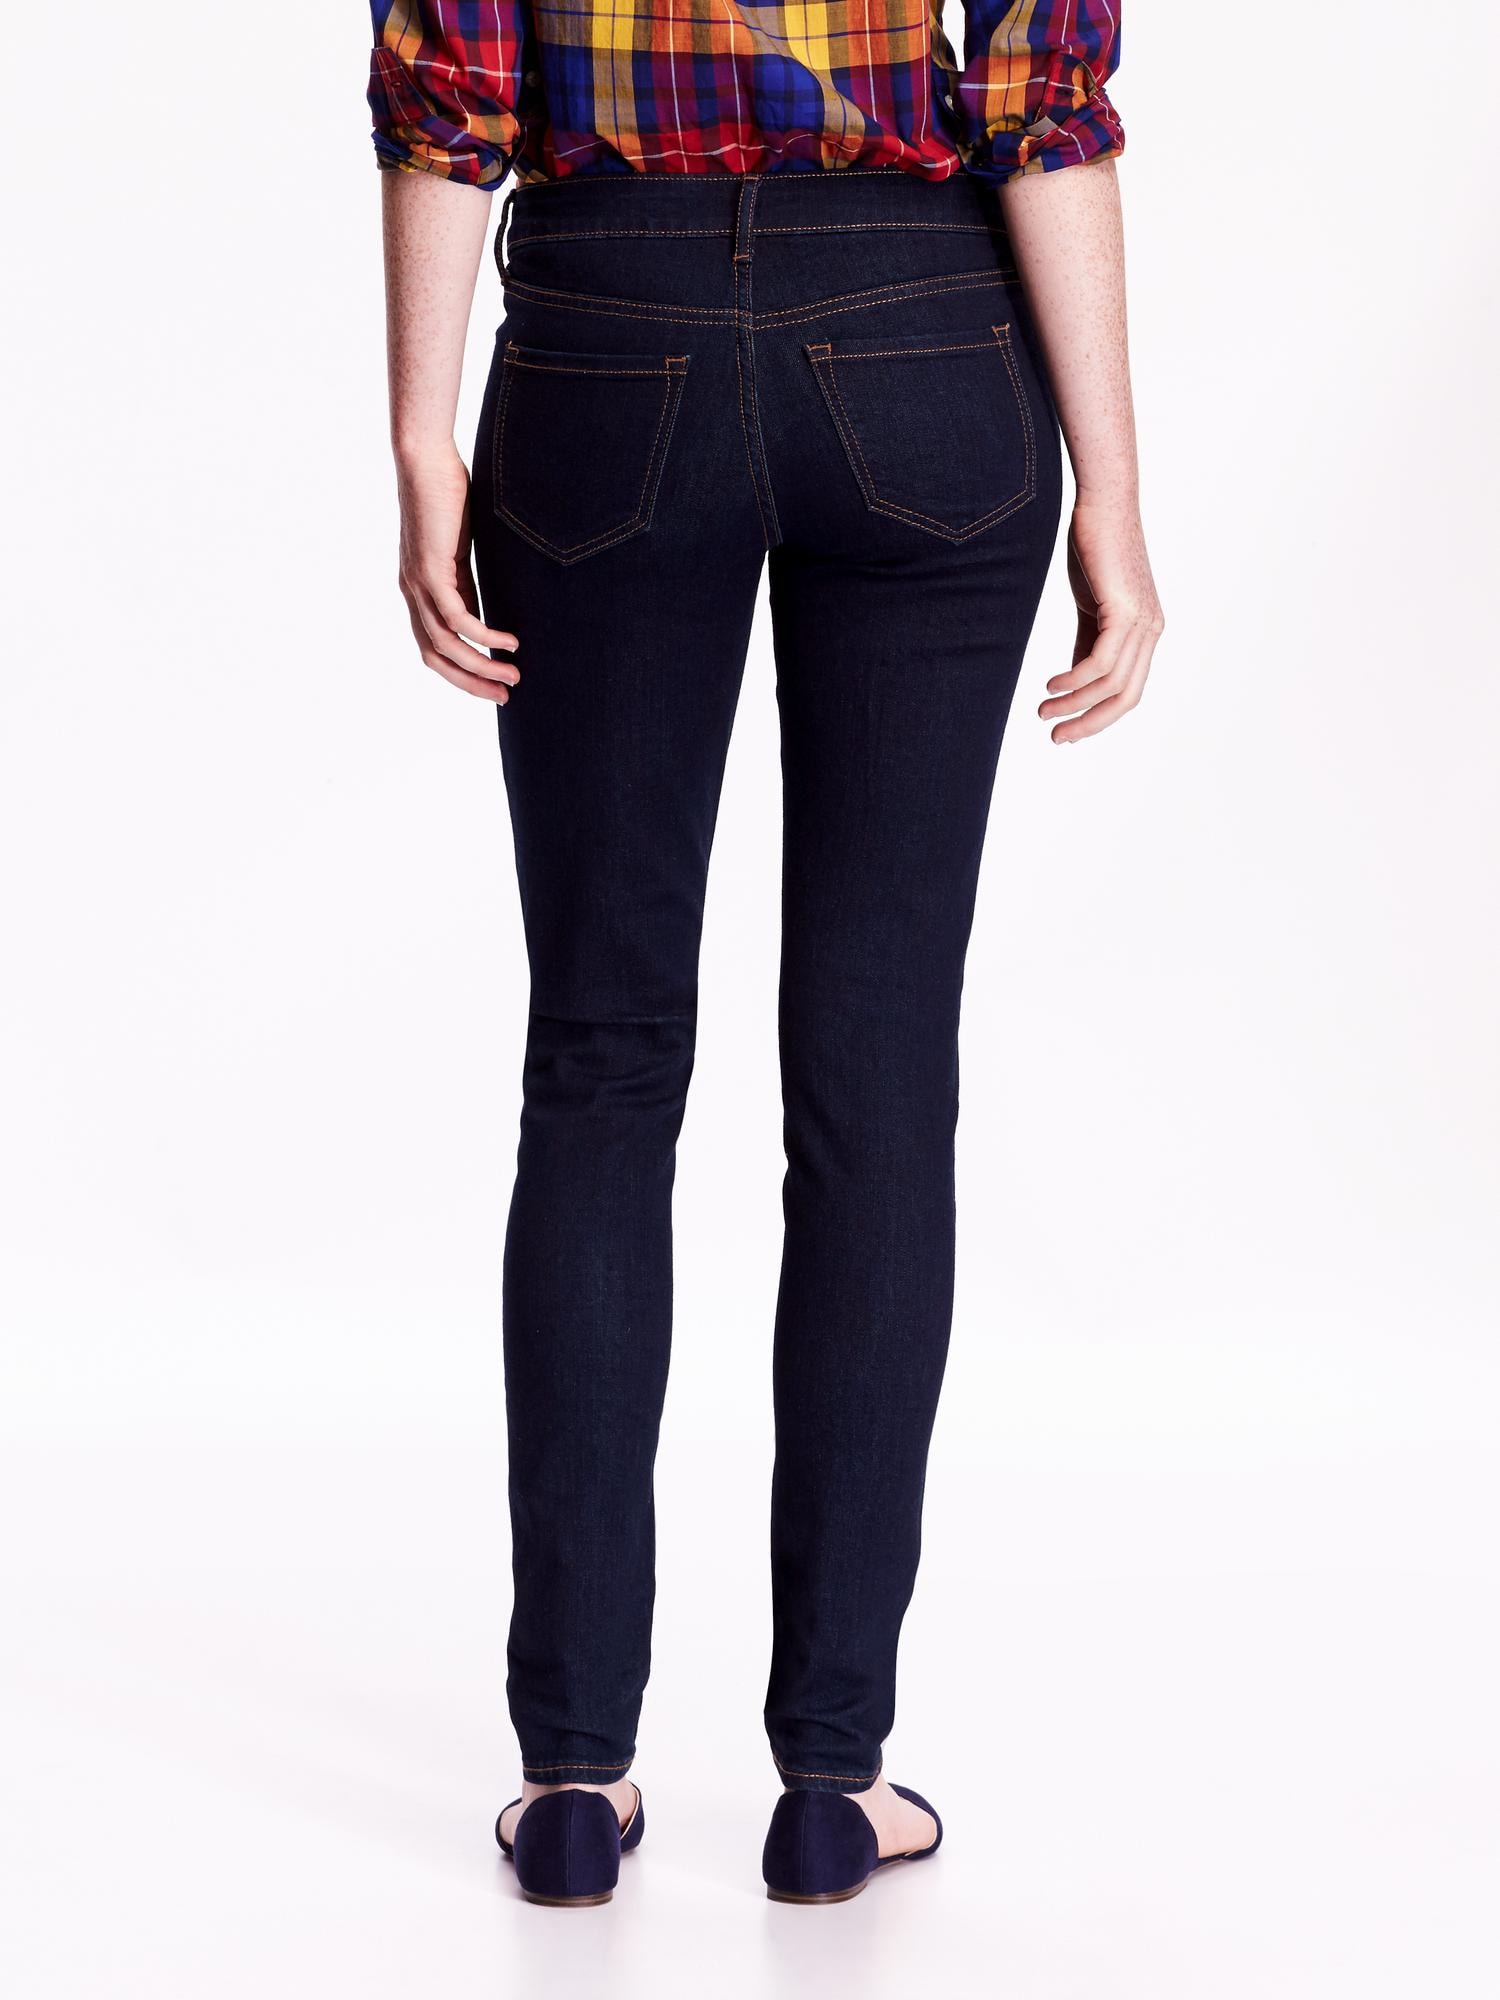 Low-Rise Rockstar Skinny Jeans for Women | Old Navy